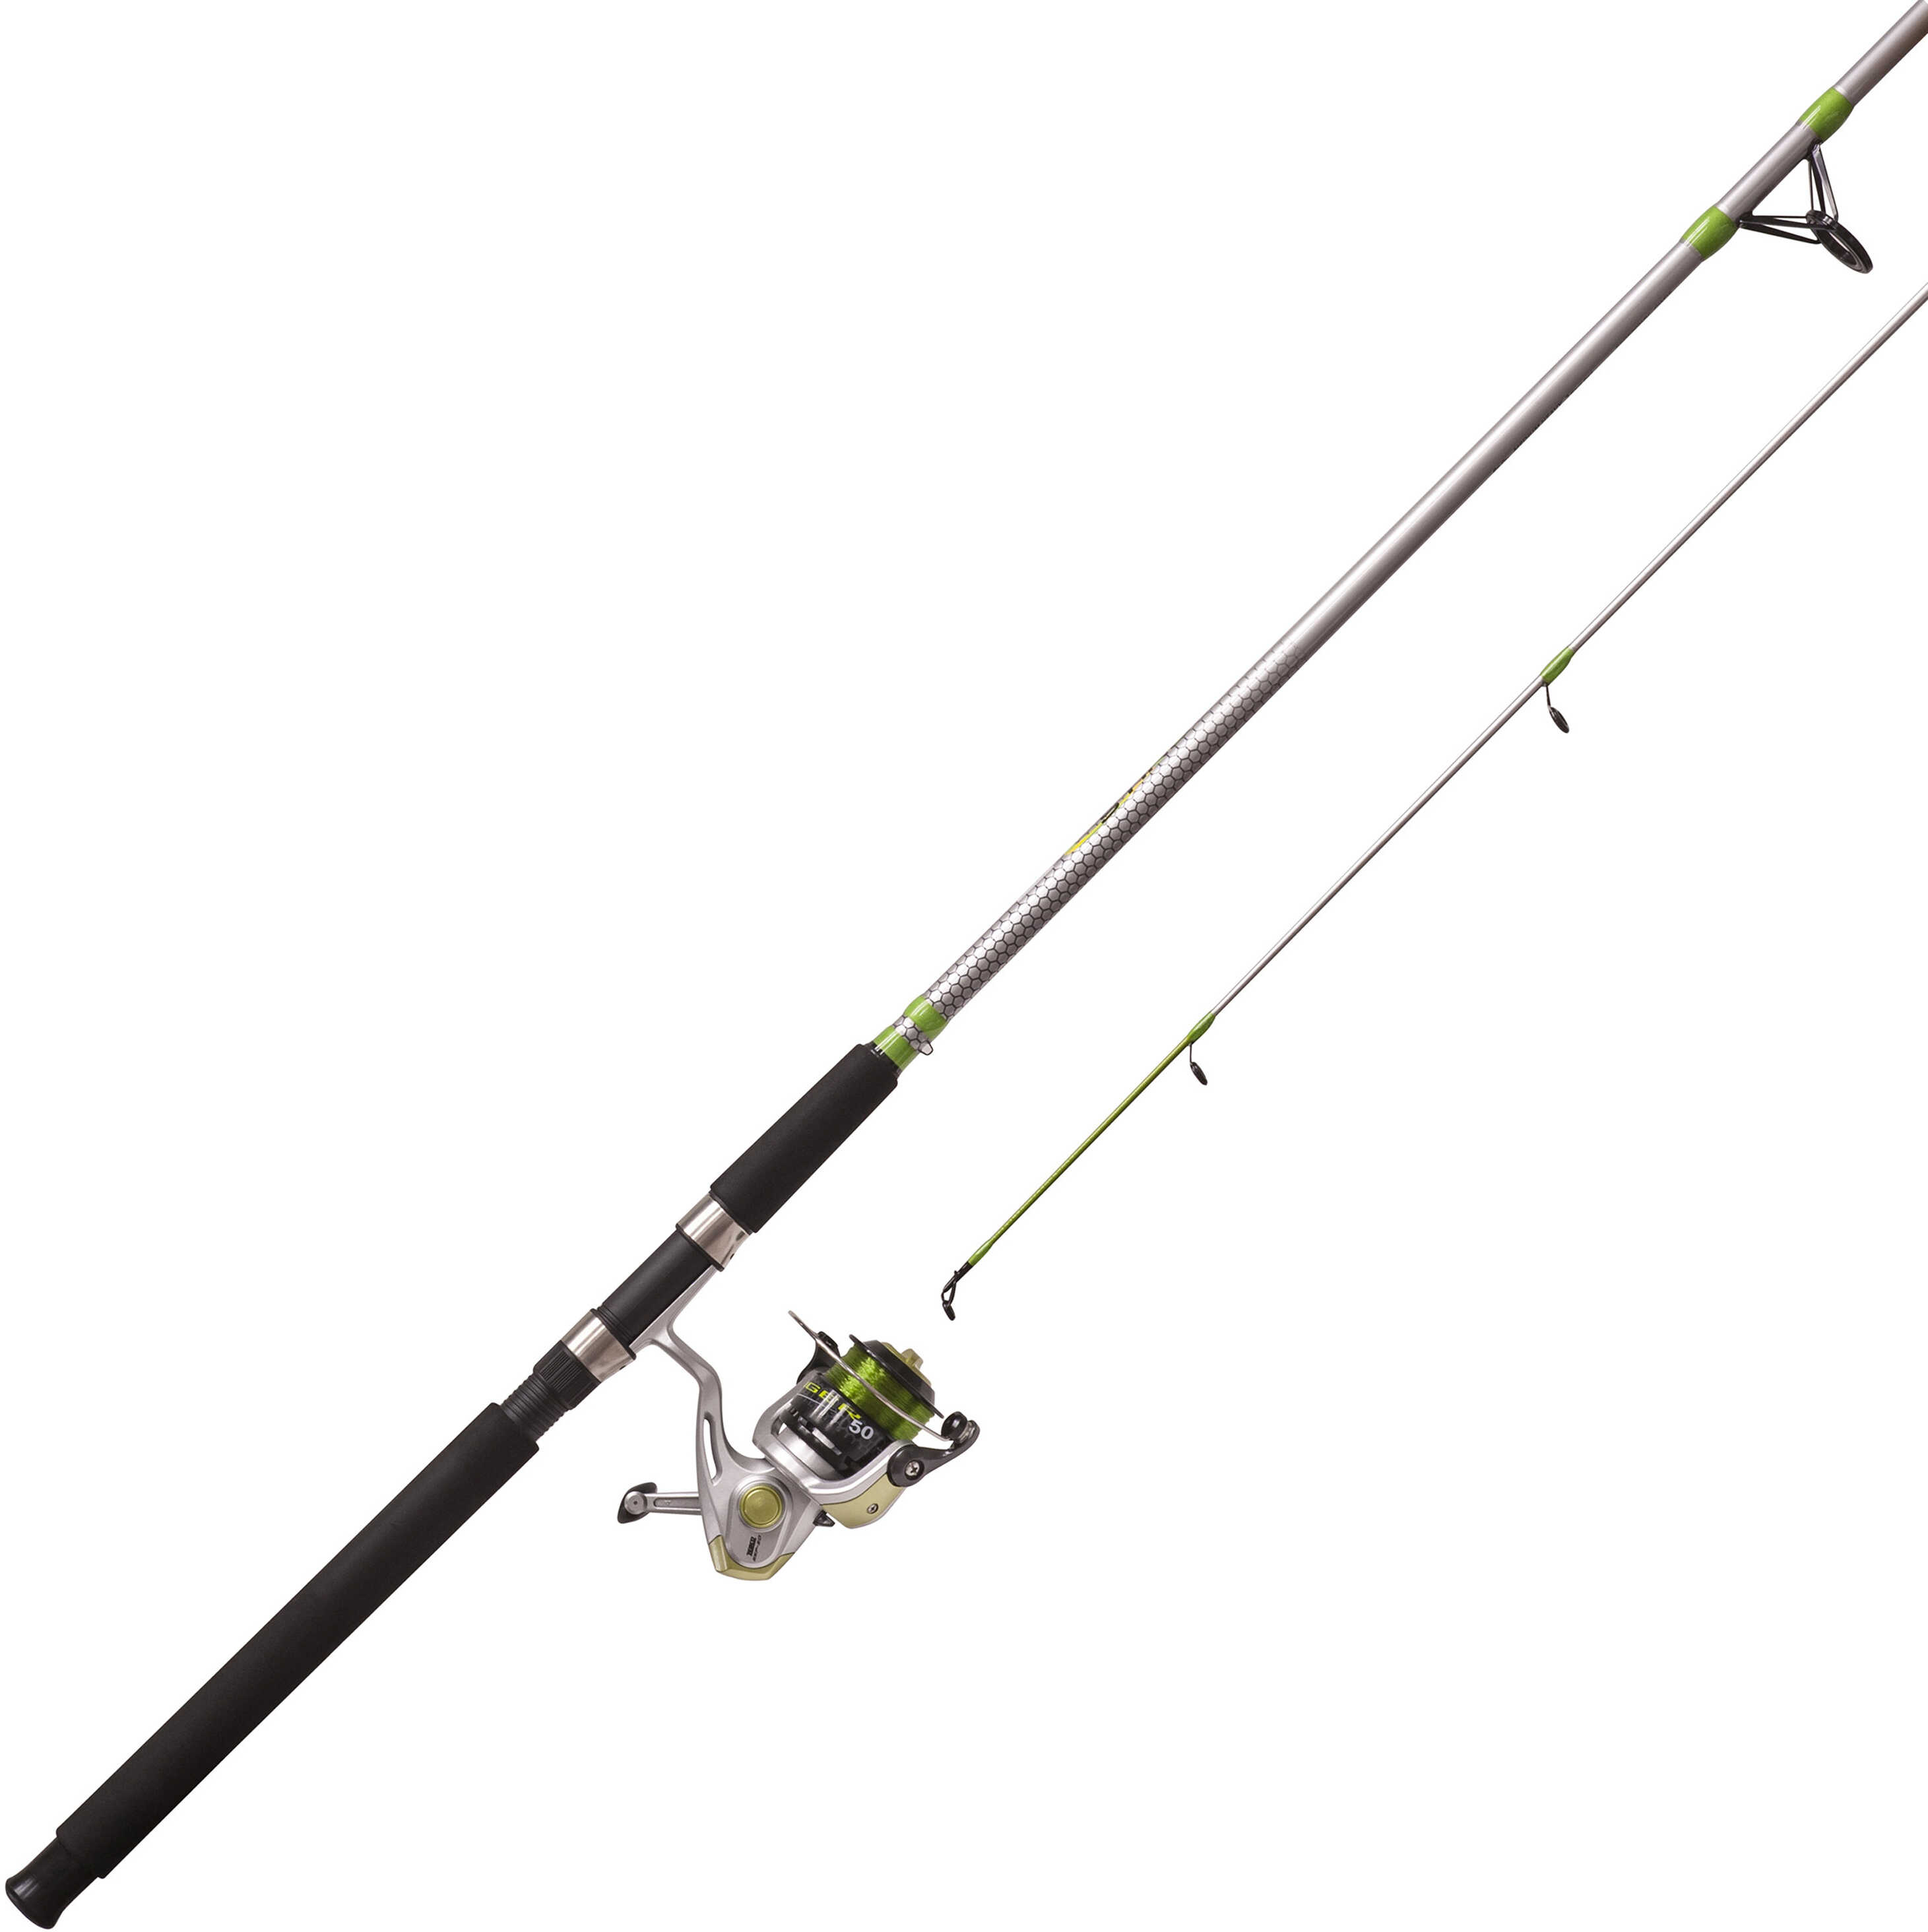 Zebco / Quantum Stinger Spinning Combo 8' 2 Pieces, Medium/Heavy Power Md: SSP60802MH,20,NS3